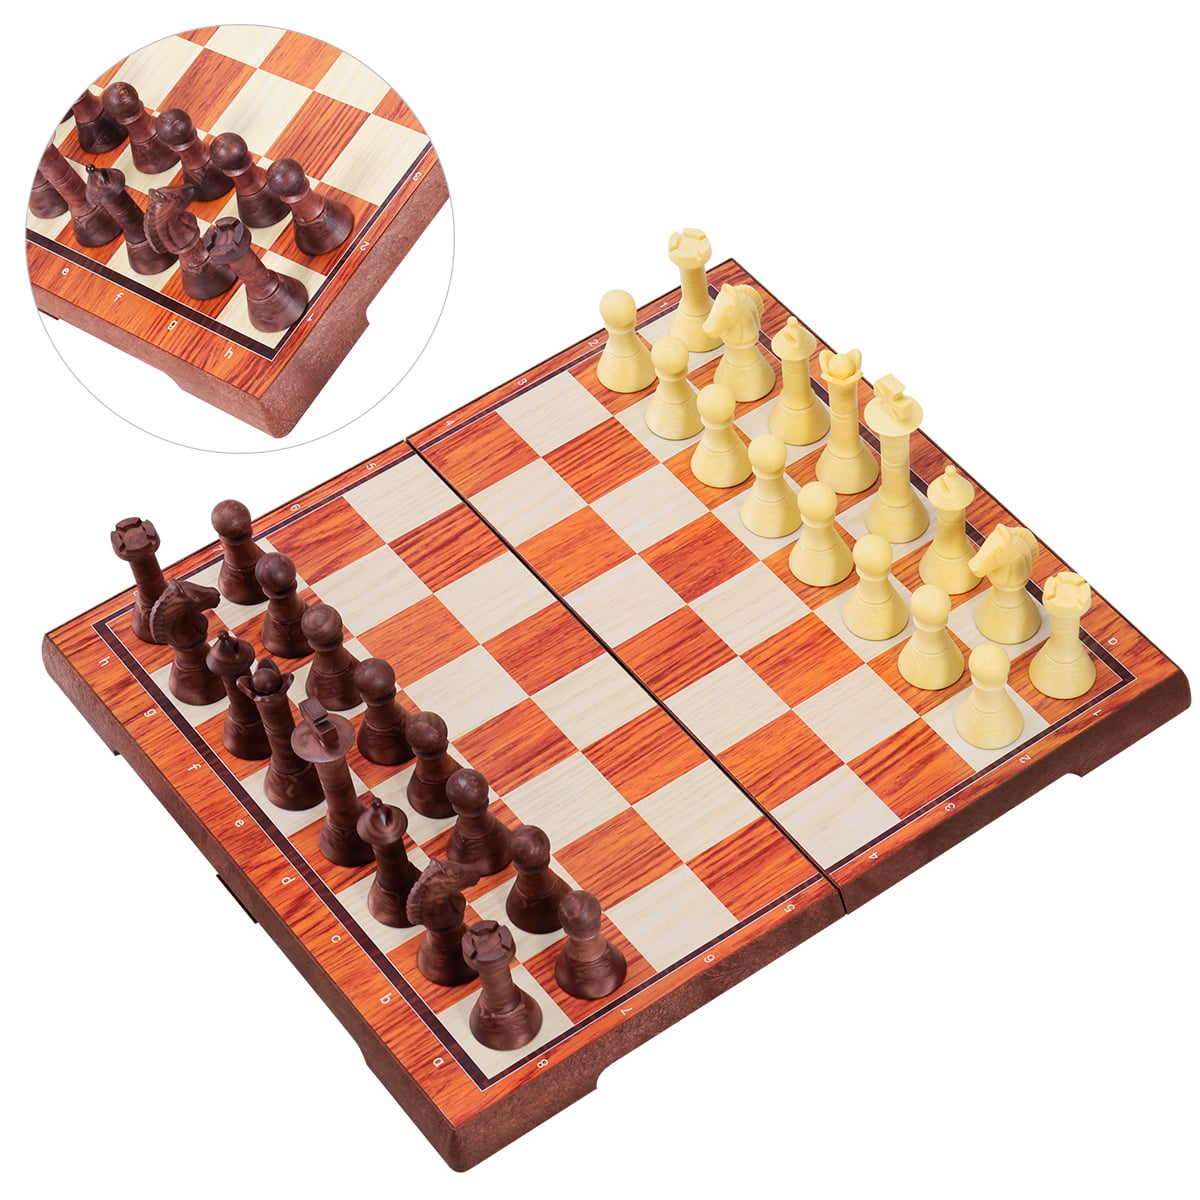 Portable Folding Magnetic Chess Checkers Board Set Travel Game Classic Toys 